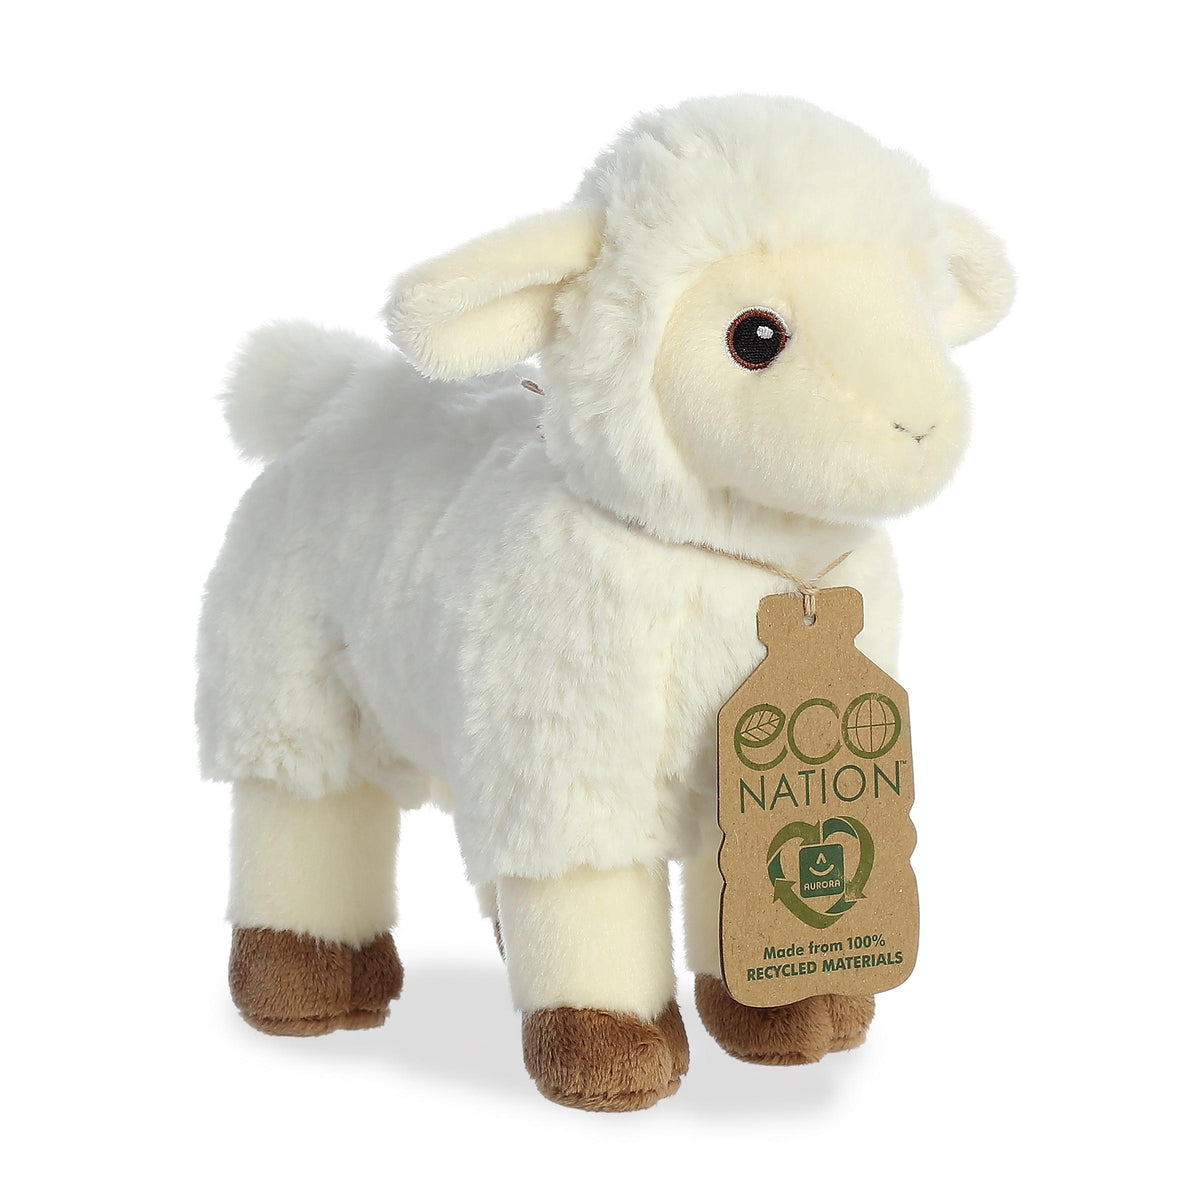 Eco Nation Plush Lamb, soft white fleece, brown hooves, promotes environmental care, perfect for all ages